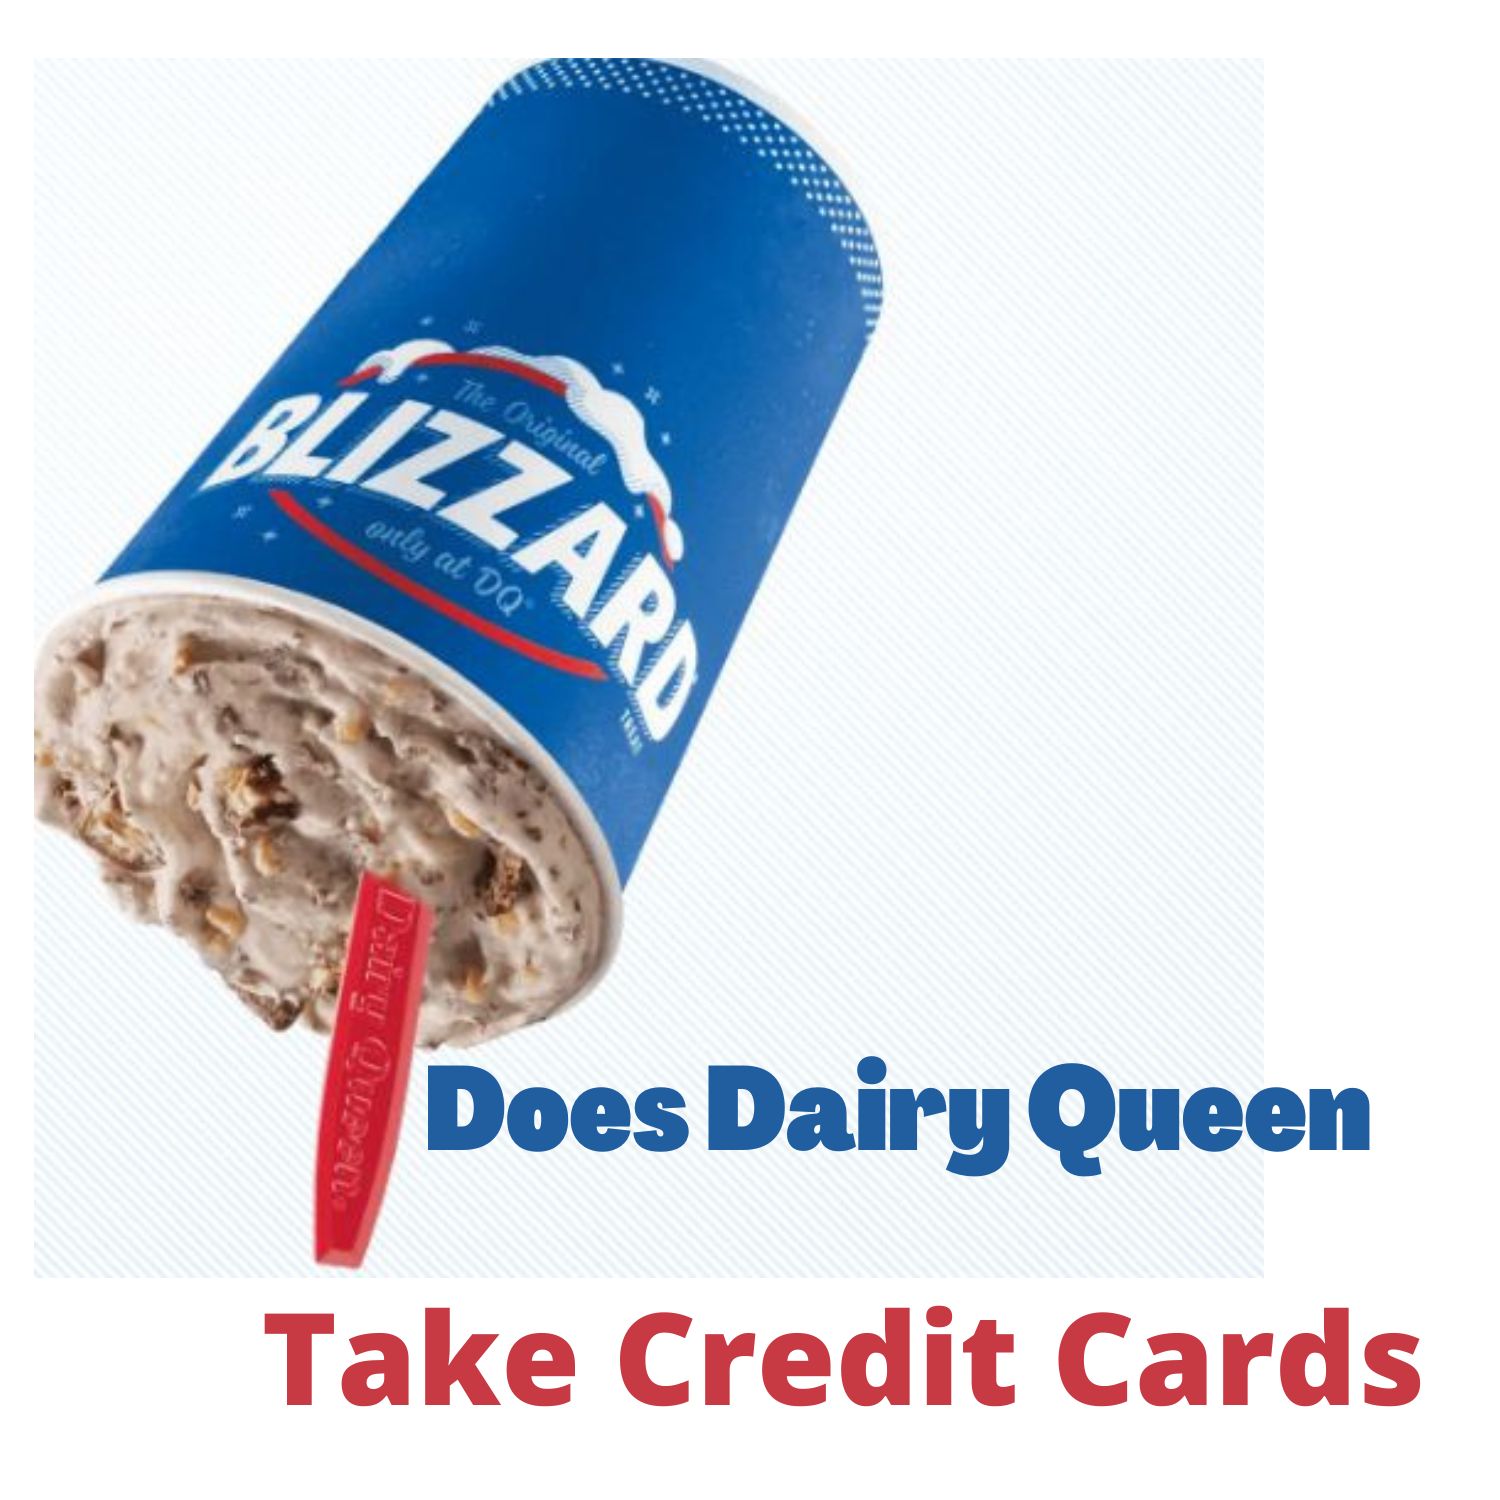 Does Dairy Queen Take Credit Cards